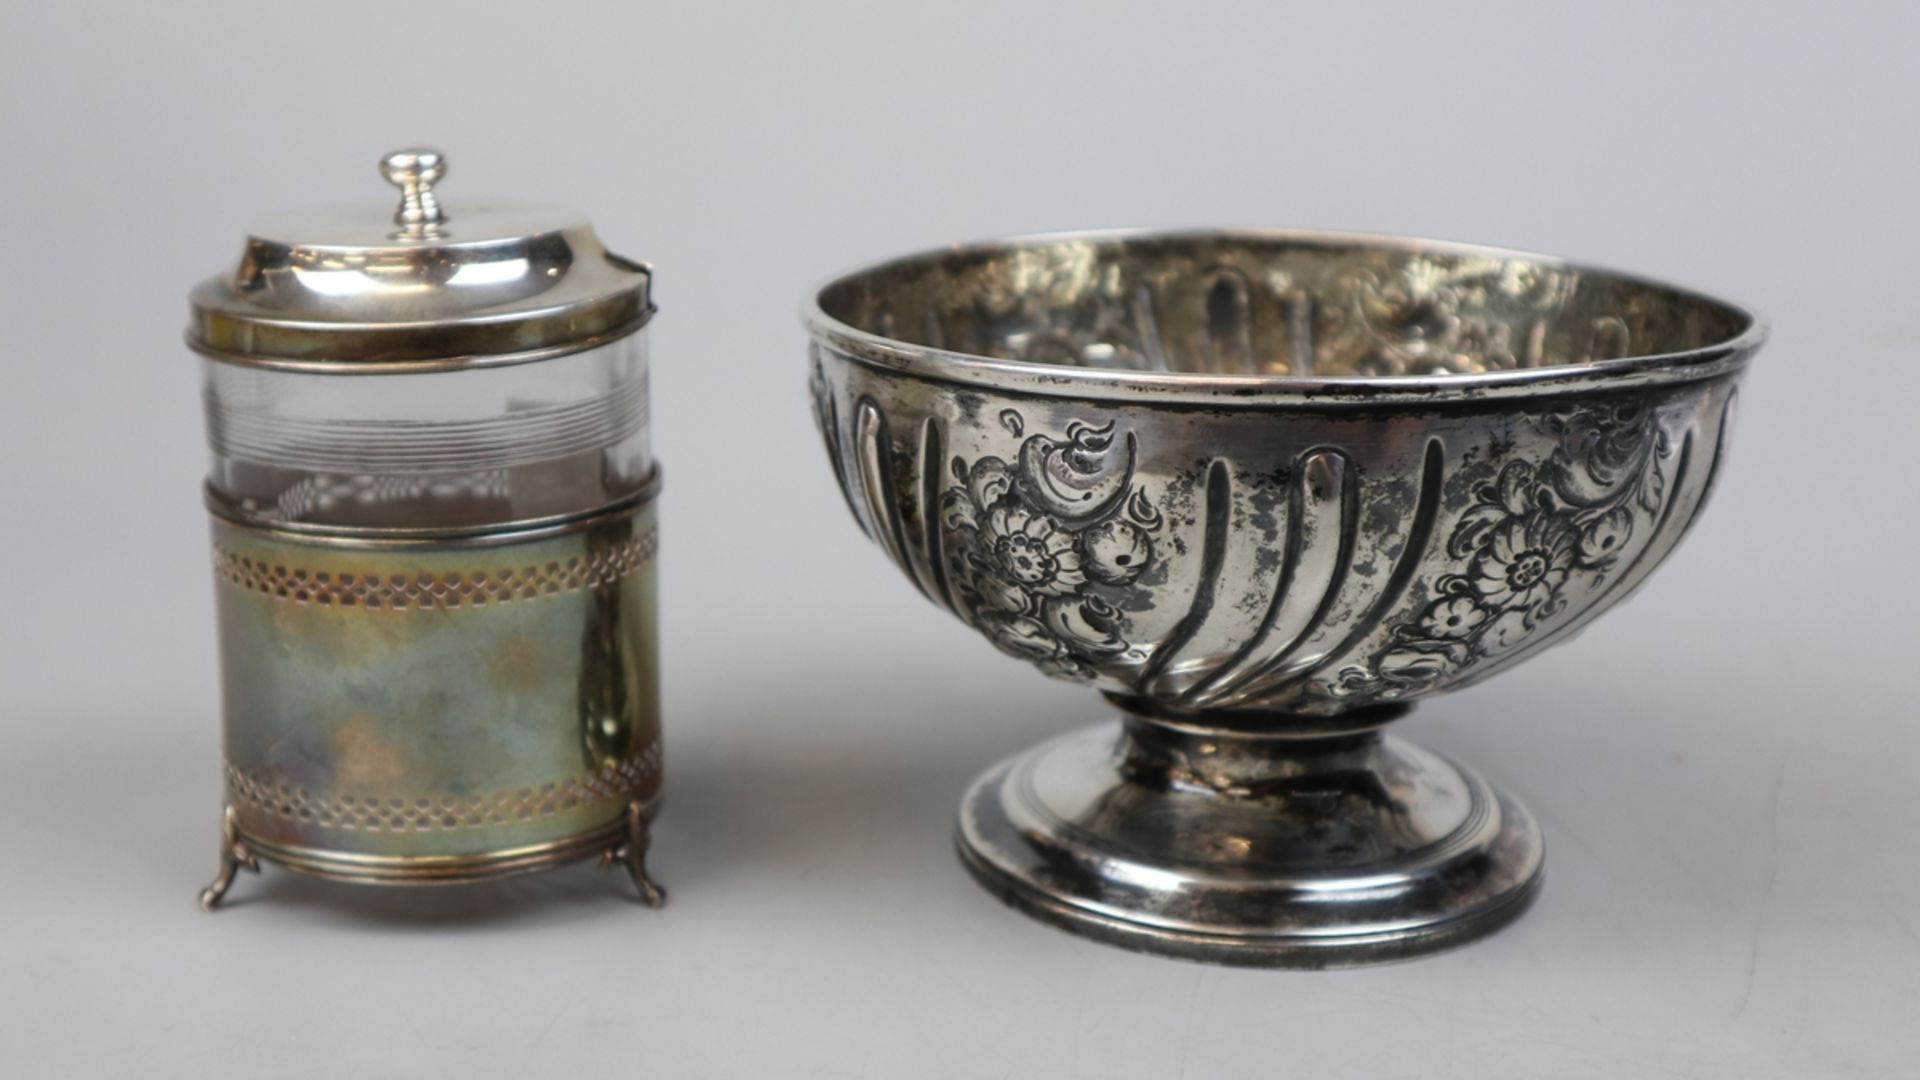 Hallmarked silver sugar bowl together with a hallmarked silver jam pot - Approx weight of silver